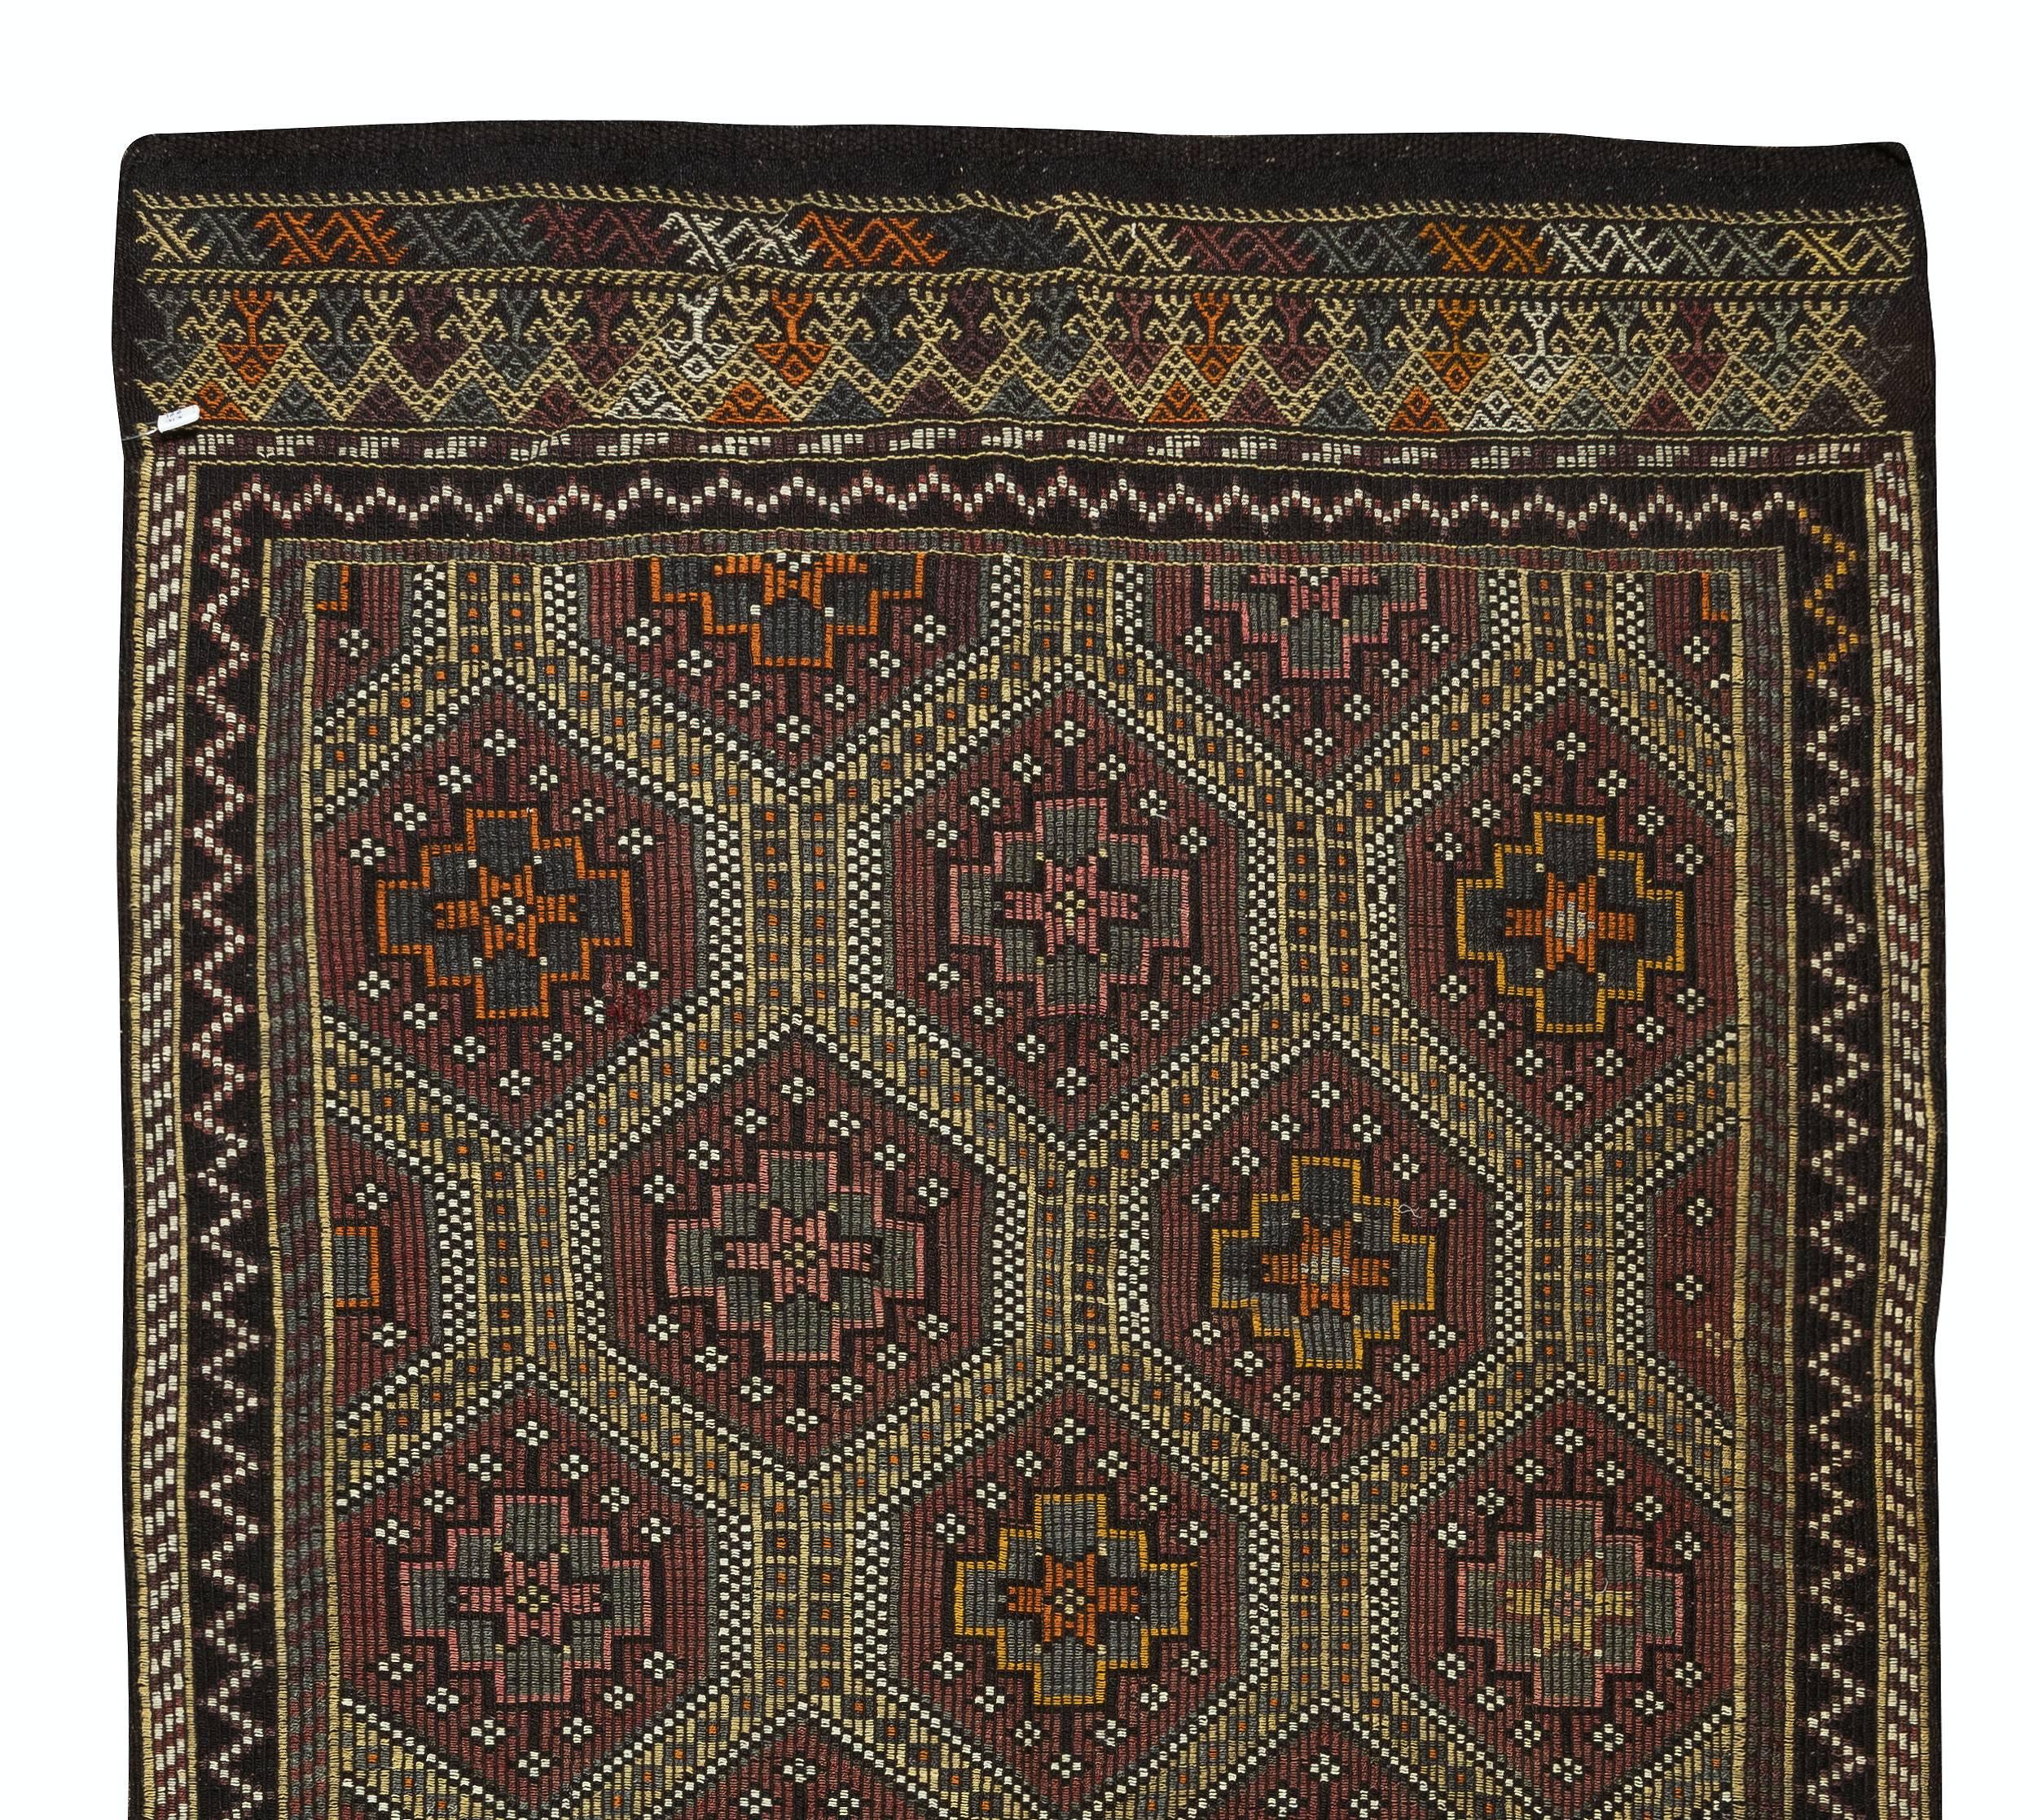 Central Anatolian Jajim Kilim, Vintage Hand-Woven Rug Made of Wool In Good Condition For Sale In Philadelphia, PA